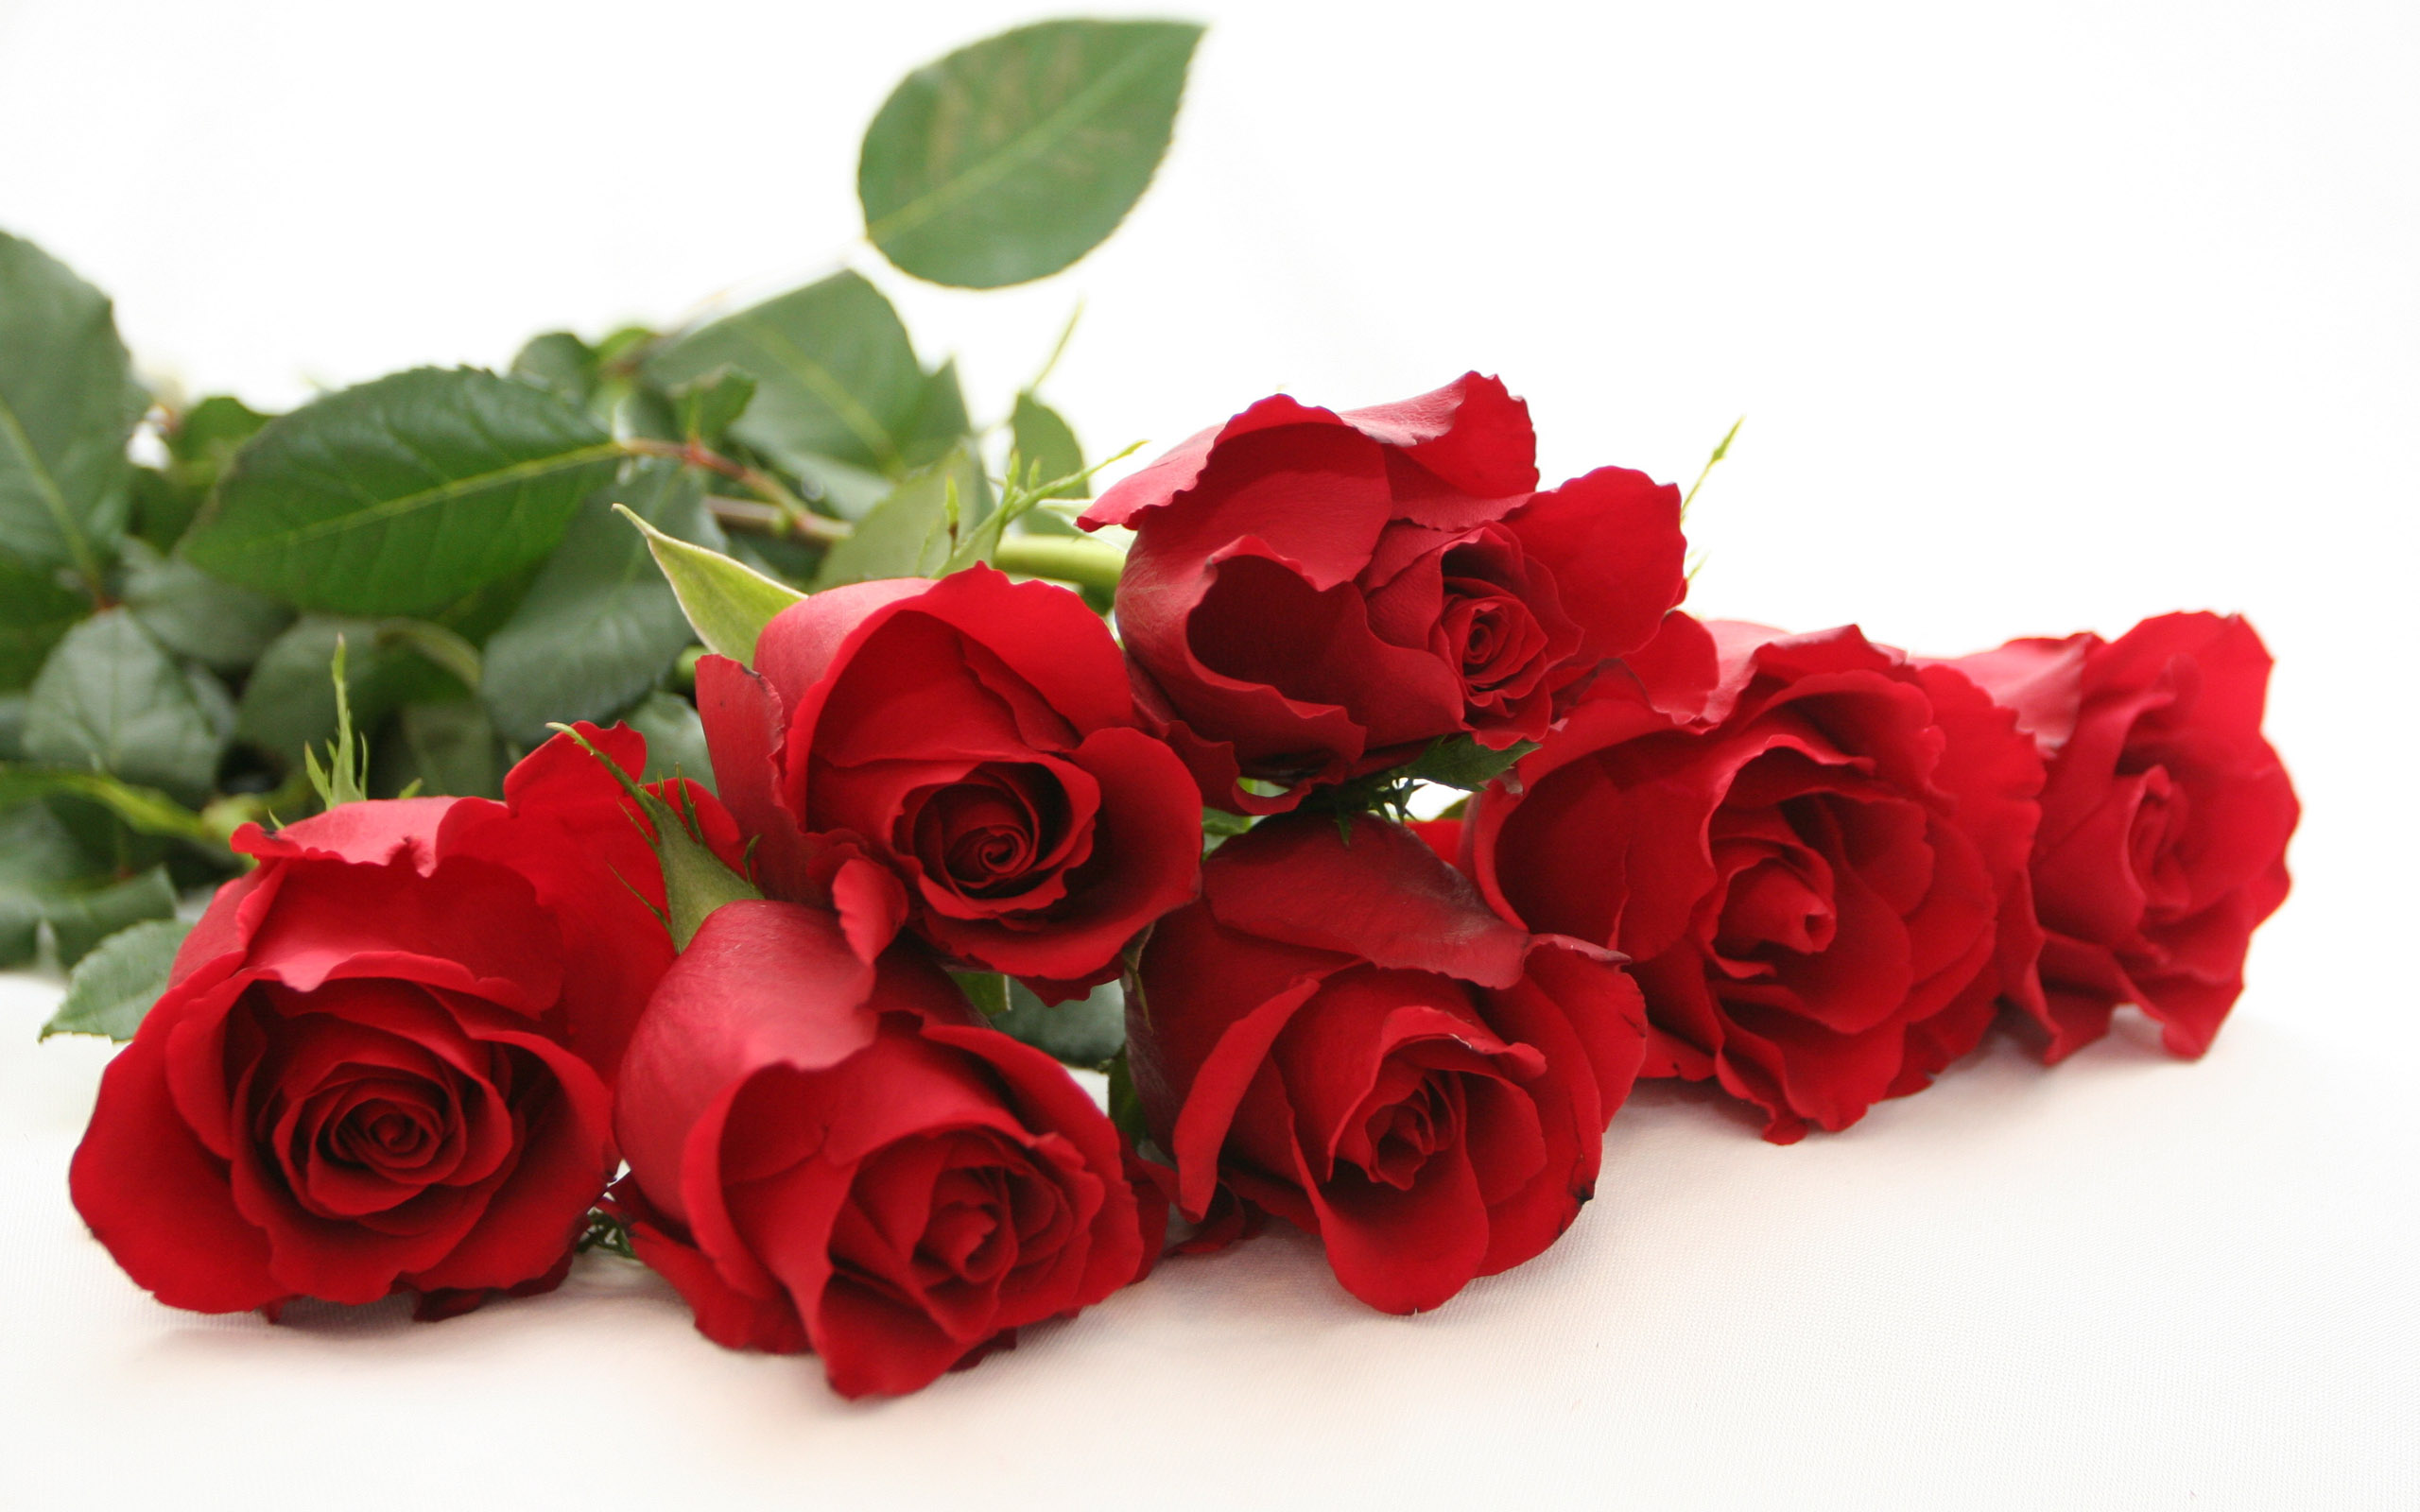 red rose with book wallpaper clipart